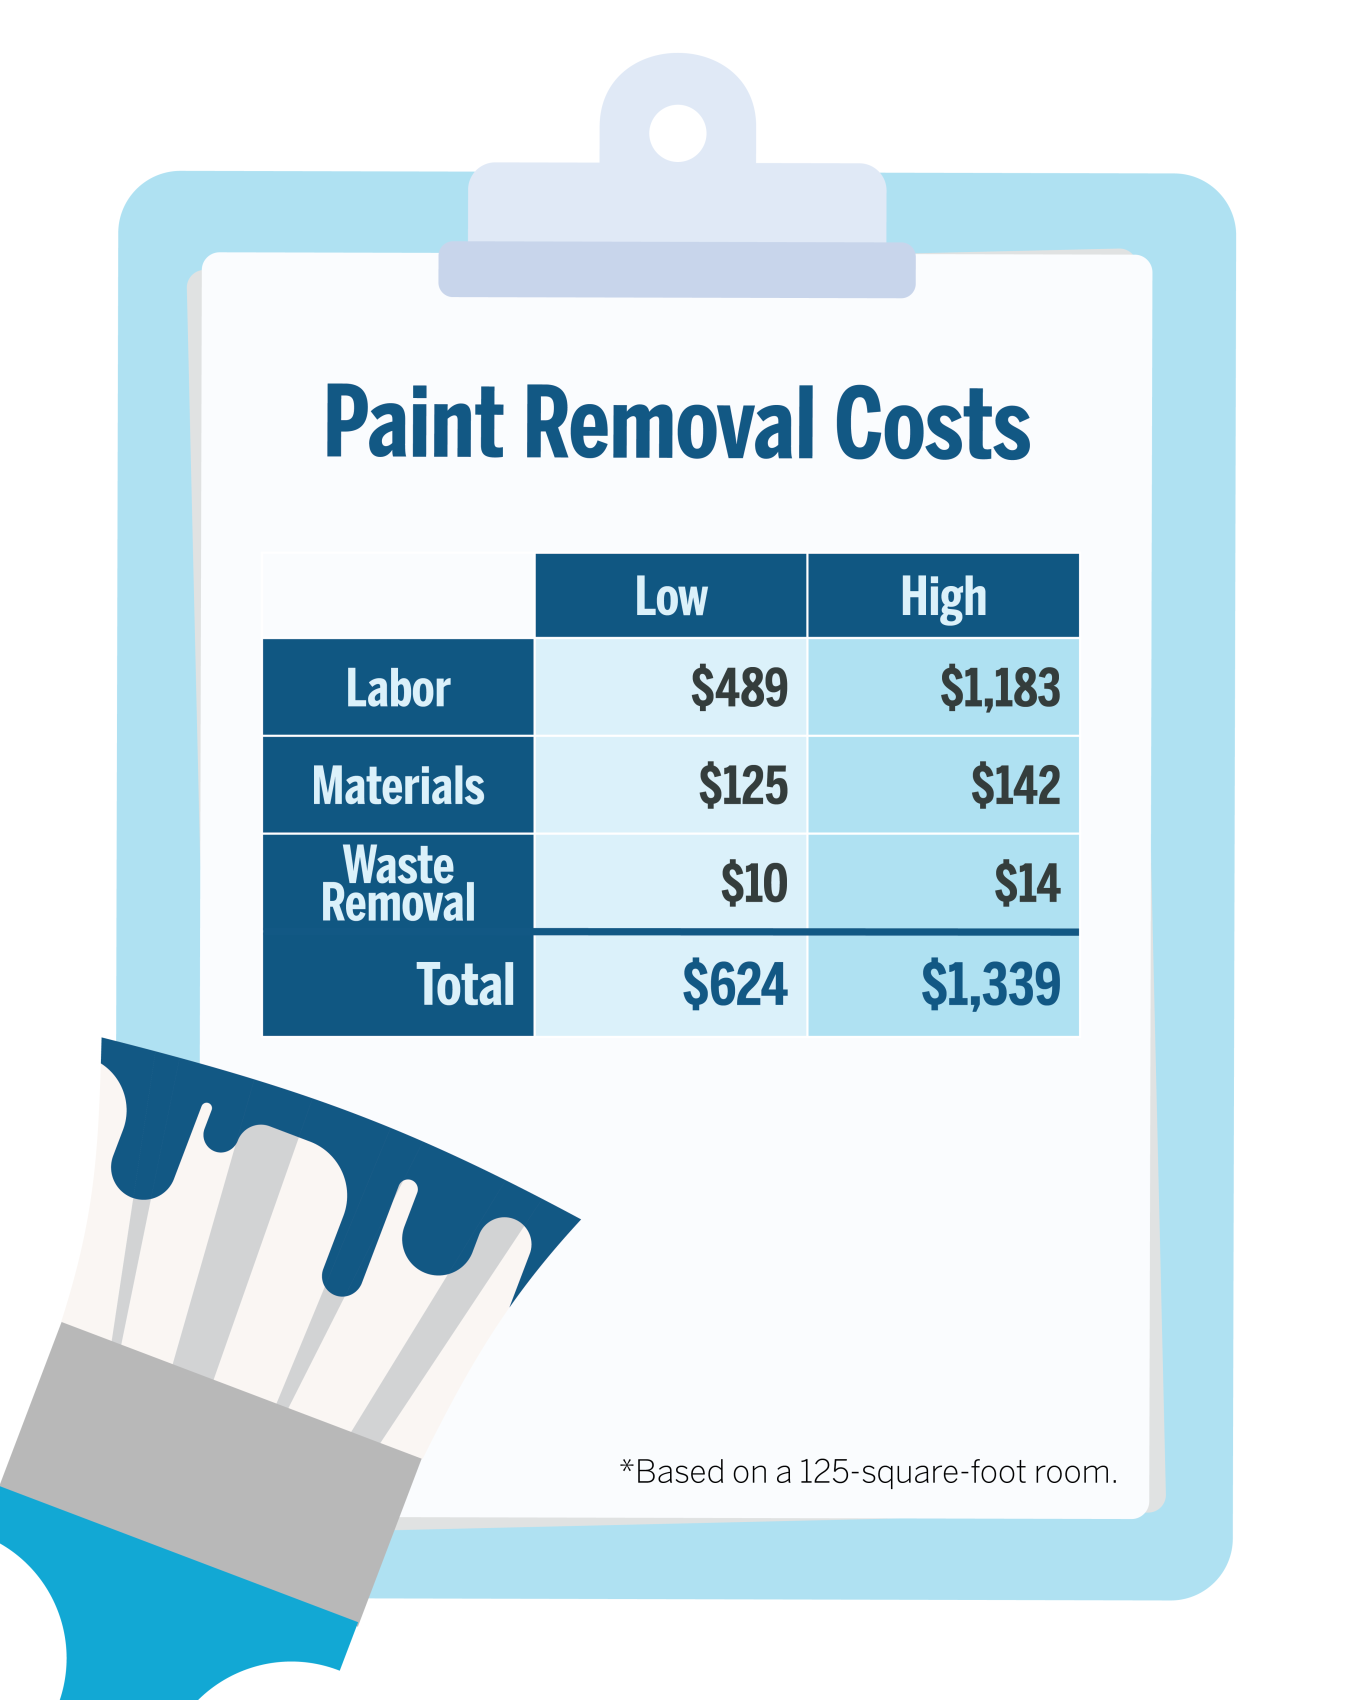 A graphic showing the low-end and high-end costs for paint removal based on a 125 square-foot room